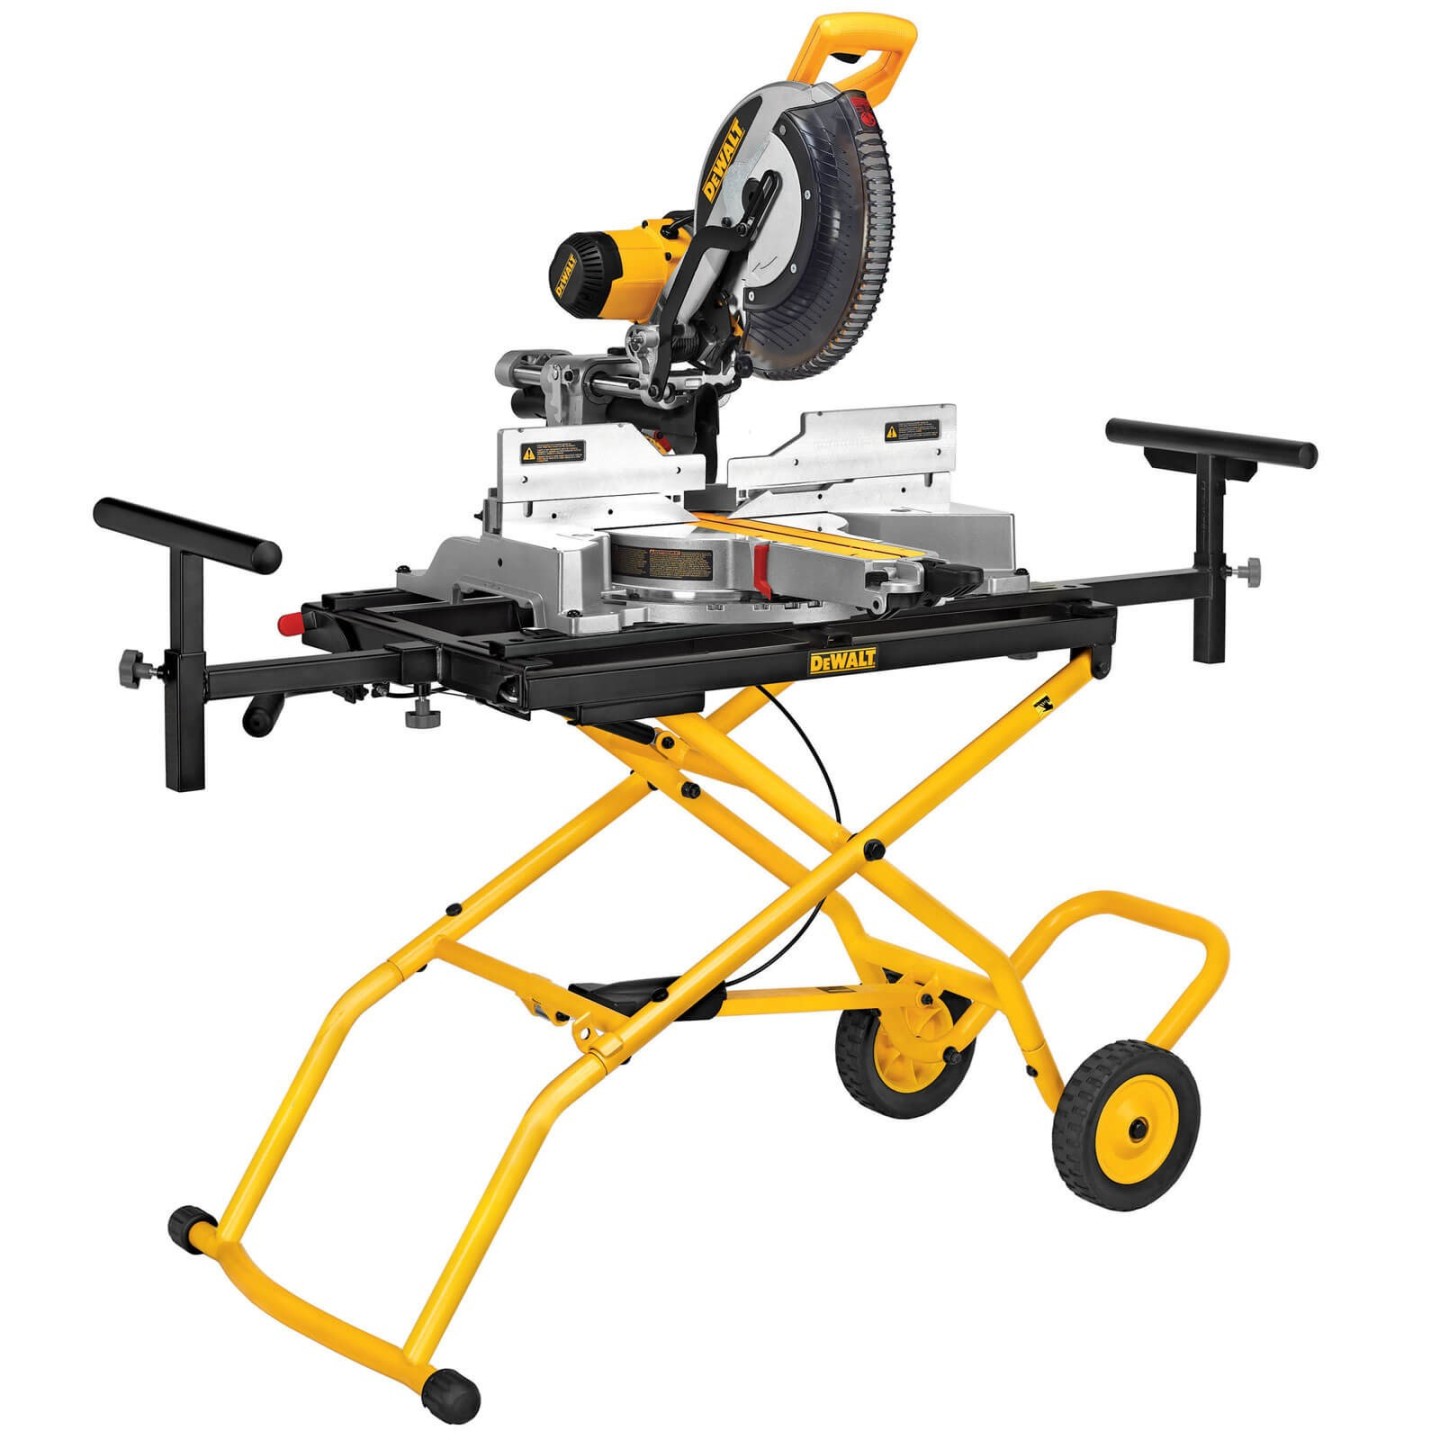 dewalt-de-folding-rolling-mitre-saw-stand-mitre-saw-stands Dewalt Chop Saw Stand Review: Stability, Portability, And More For Your Miter Saw picture